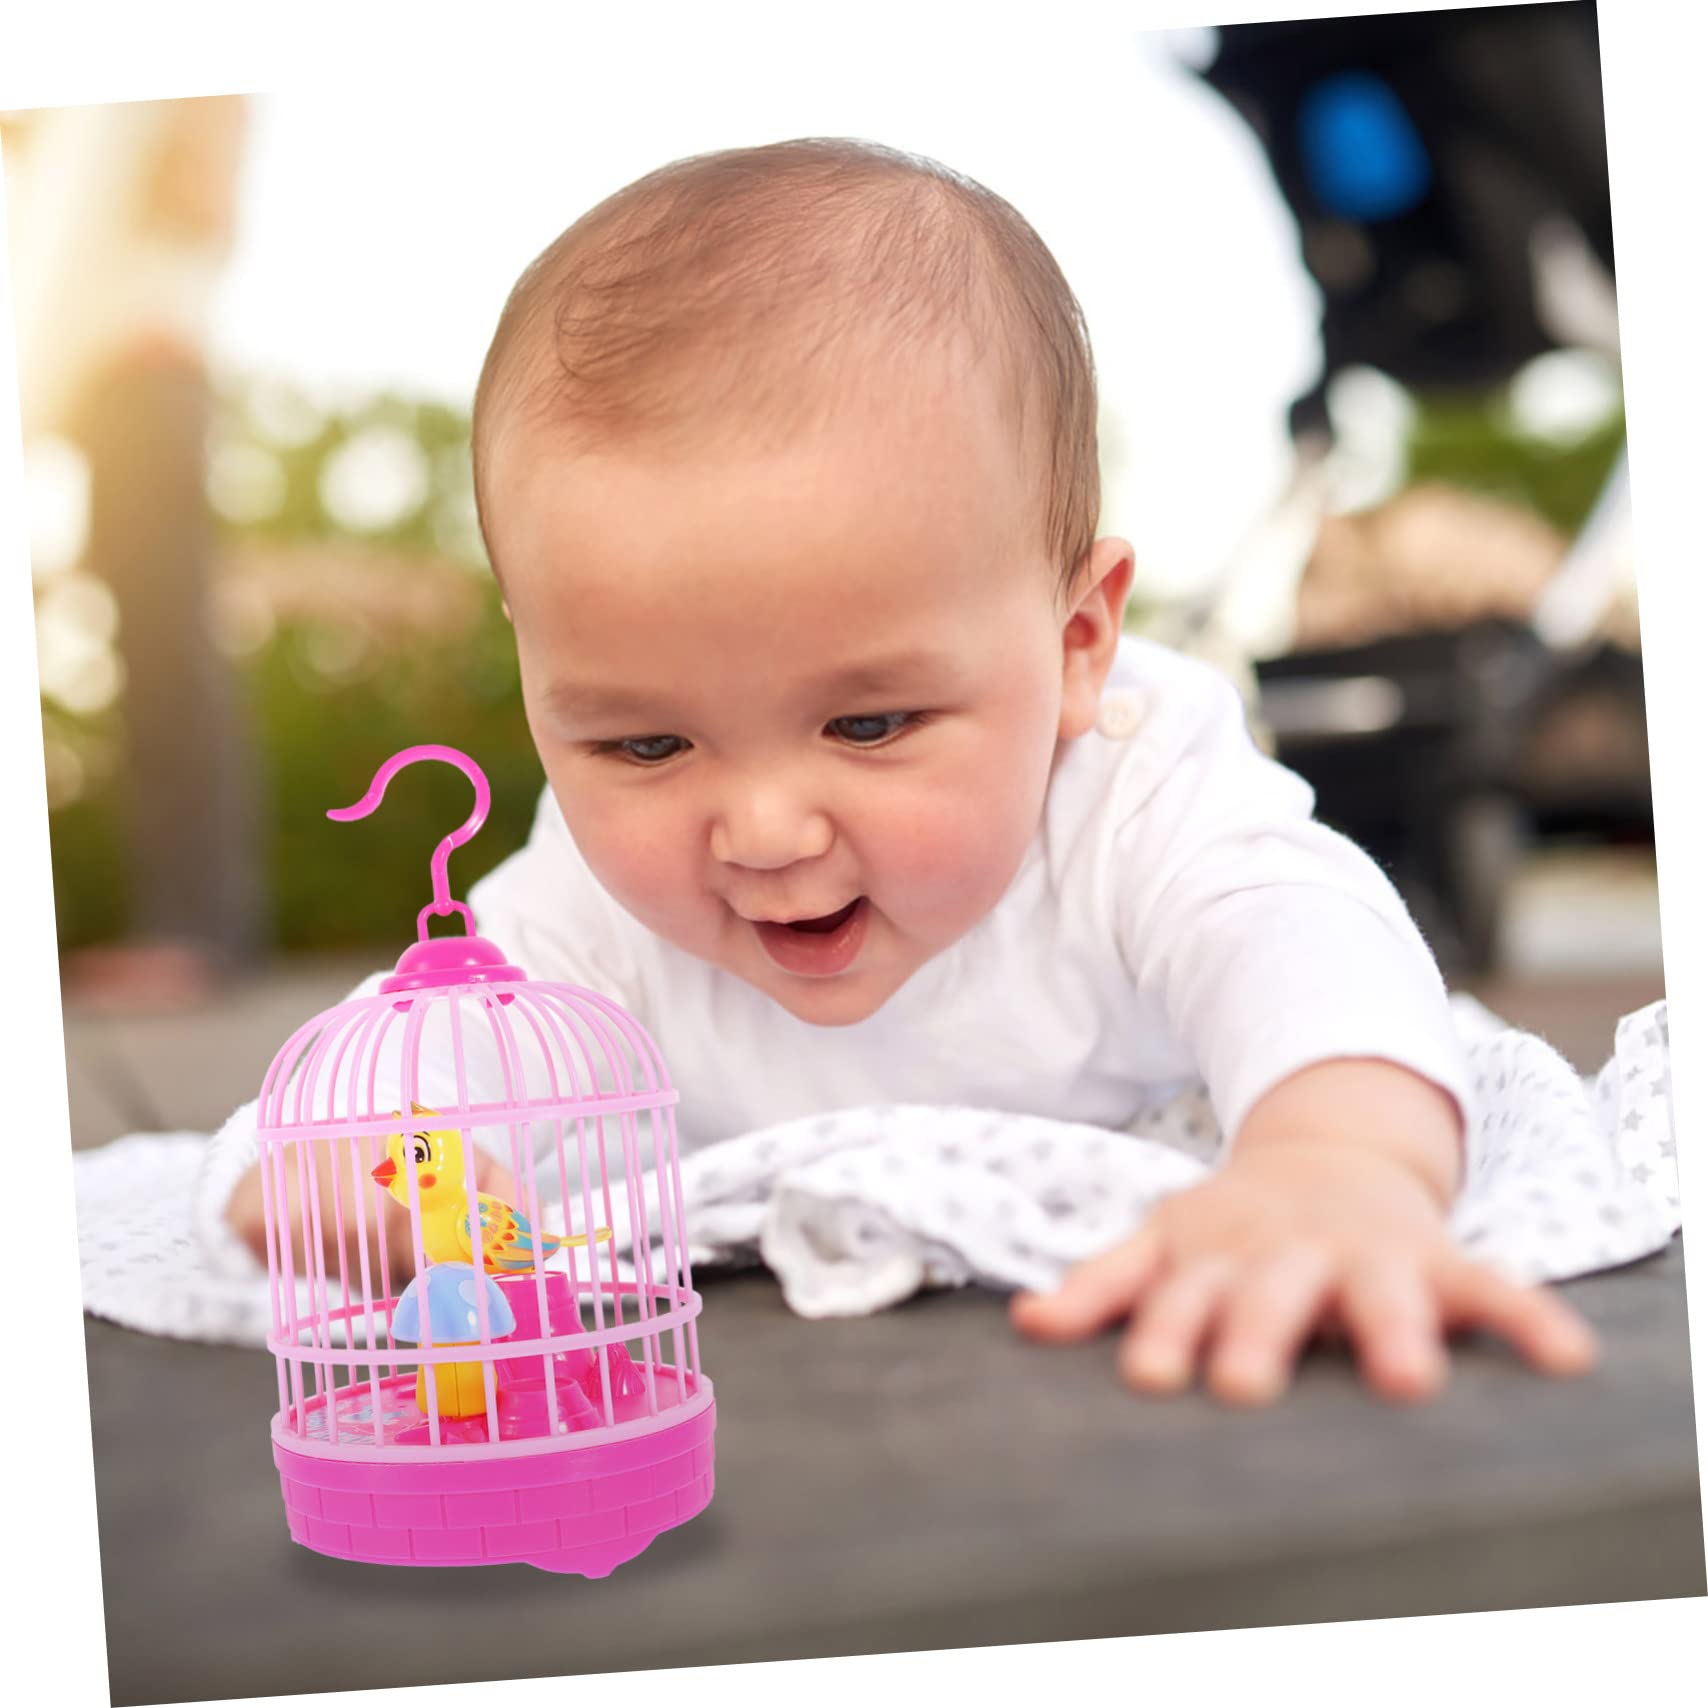 ERINGOGO 1 Set Light Music Bird Cage Singing Bird Cage Voice Control Toy Bird Toy for Leisure Time Bird Toy with Hanging Hook Light Sensor Toy The Bird Model Birds Parrot Child Cat Toy Abs